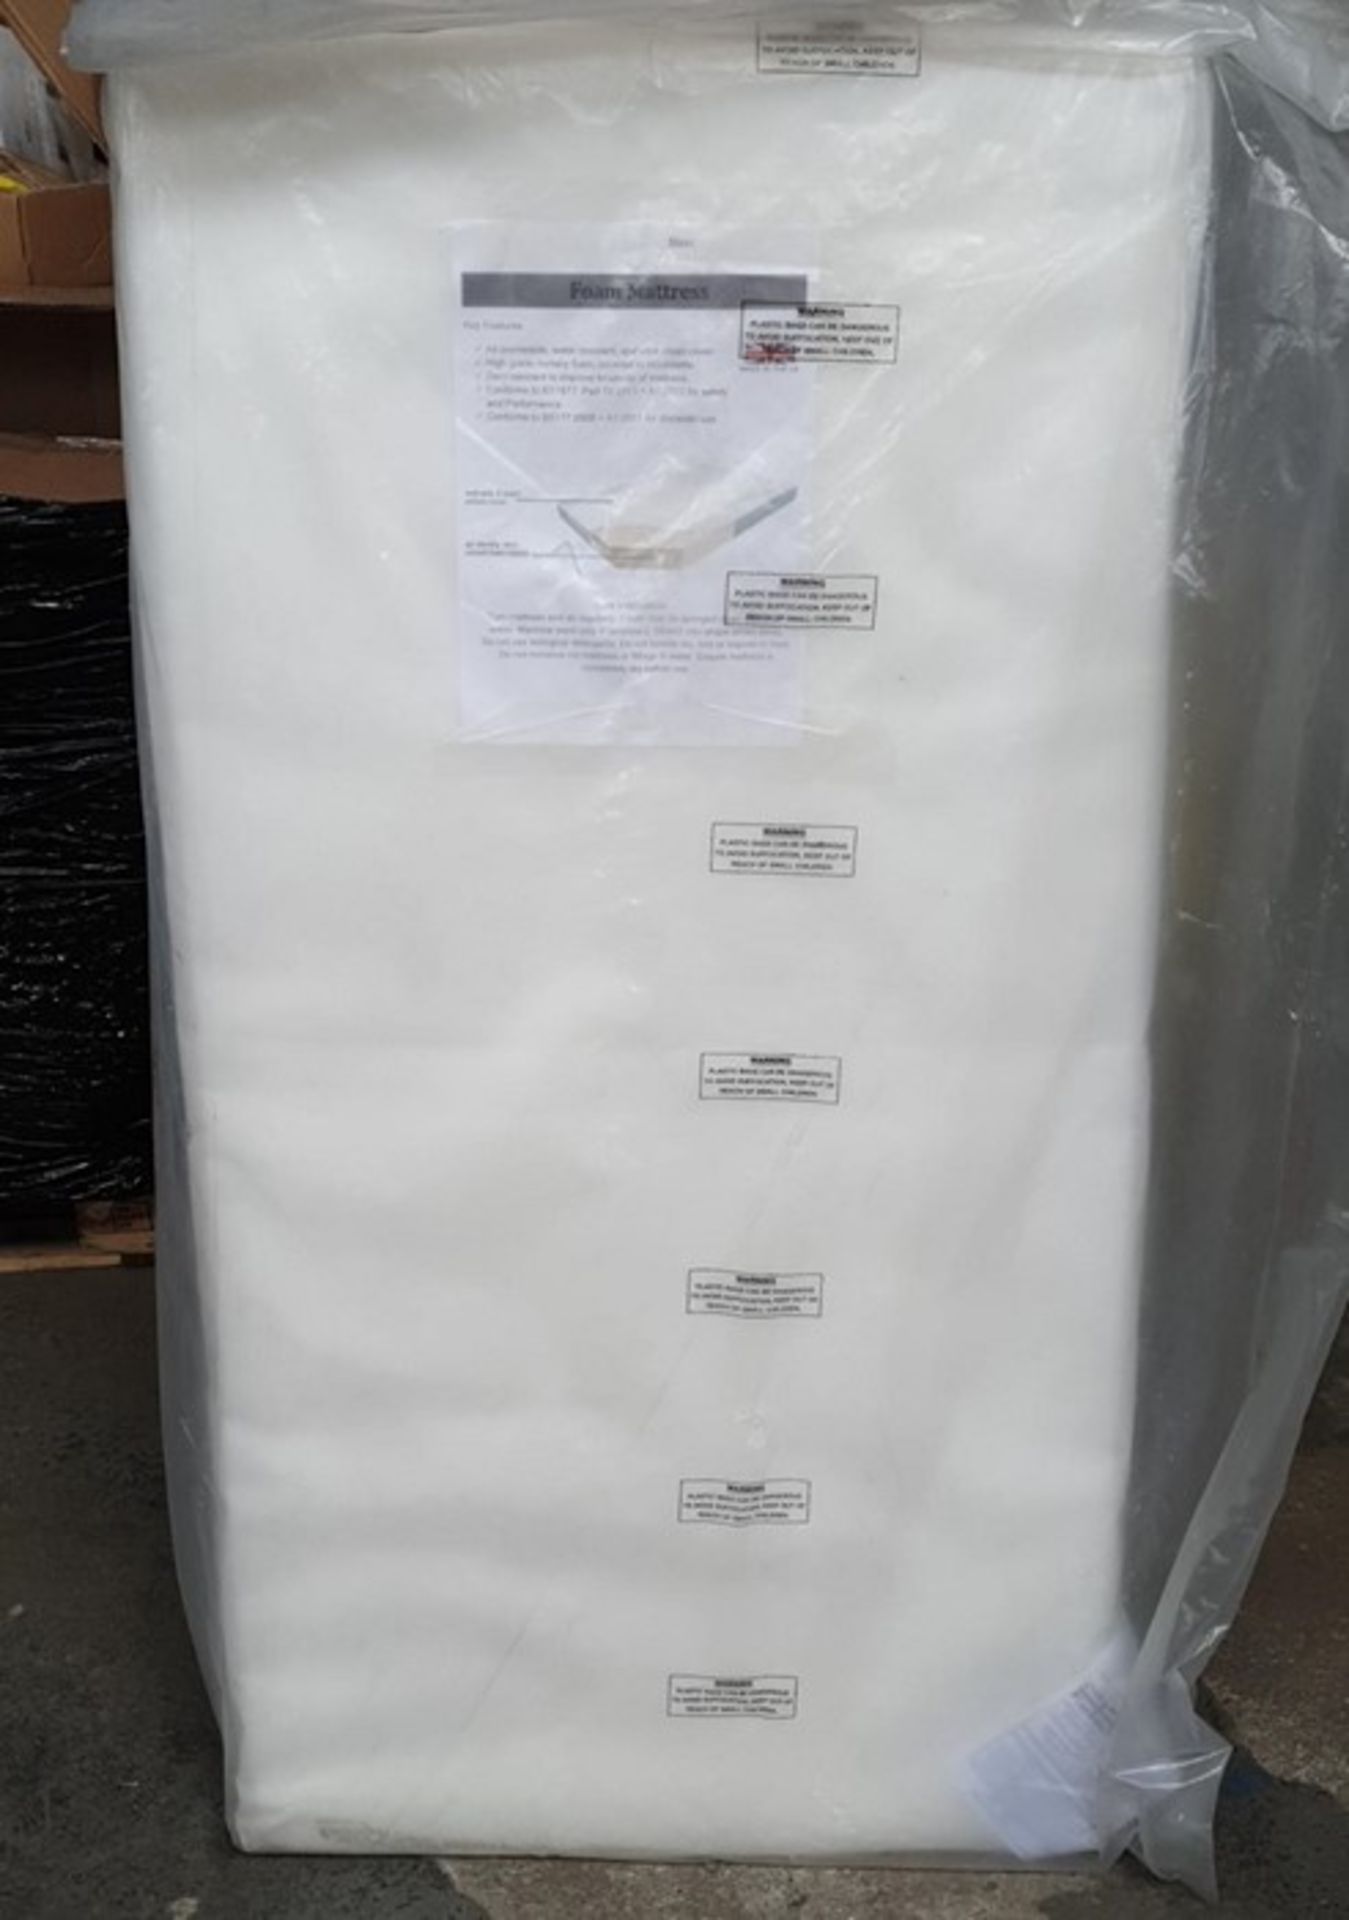 1 GRADE A BAGGED UNBRANDED FOAM COT MATTRESS - 120X60X7CM / RRP £40.00 (VIEWING HIGHLY RECOMMENDED)